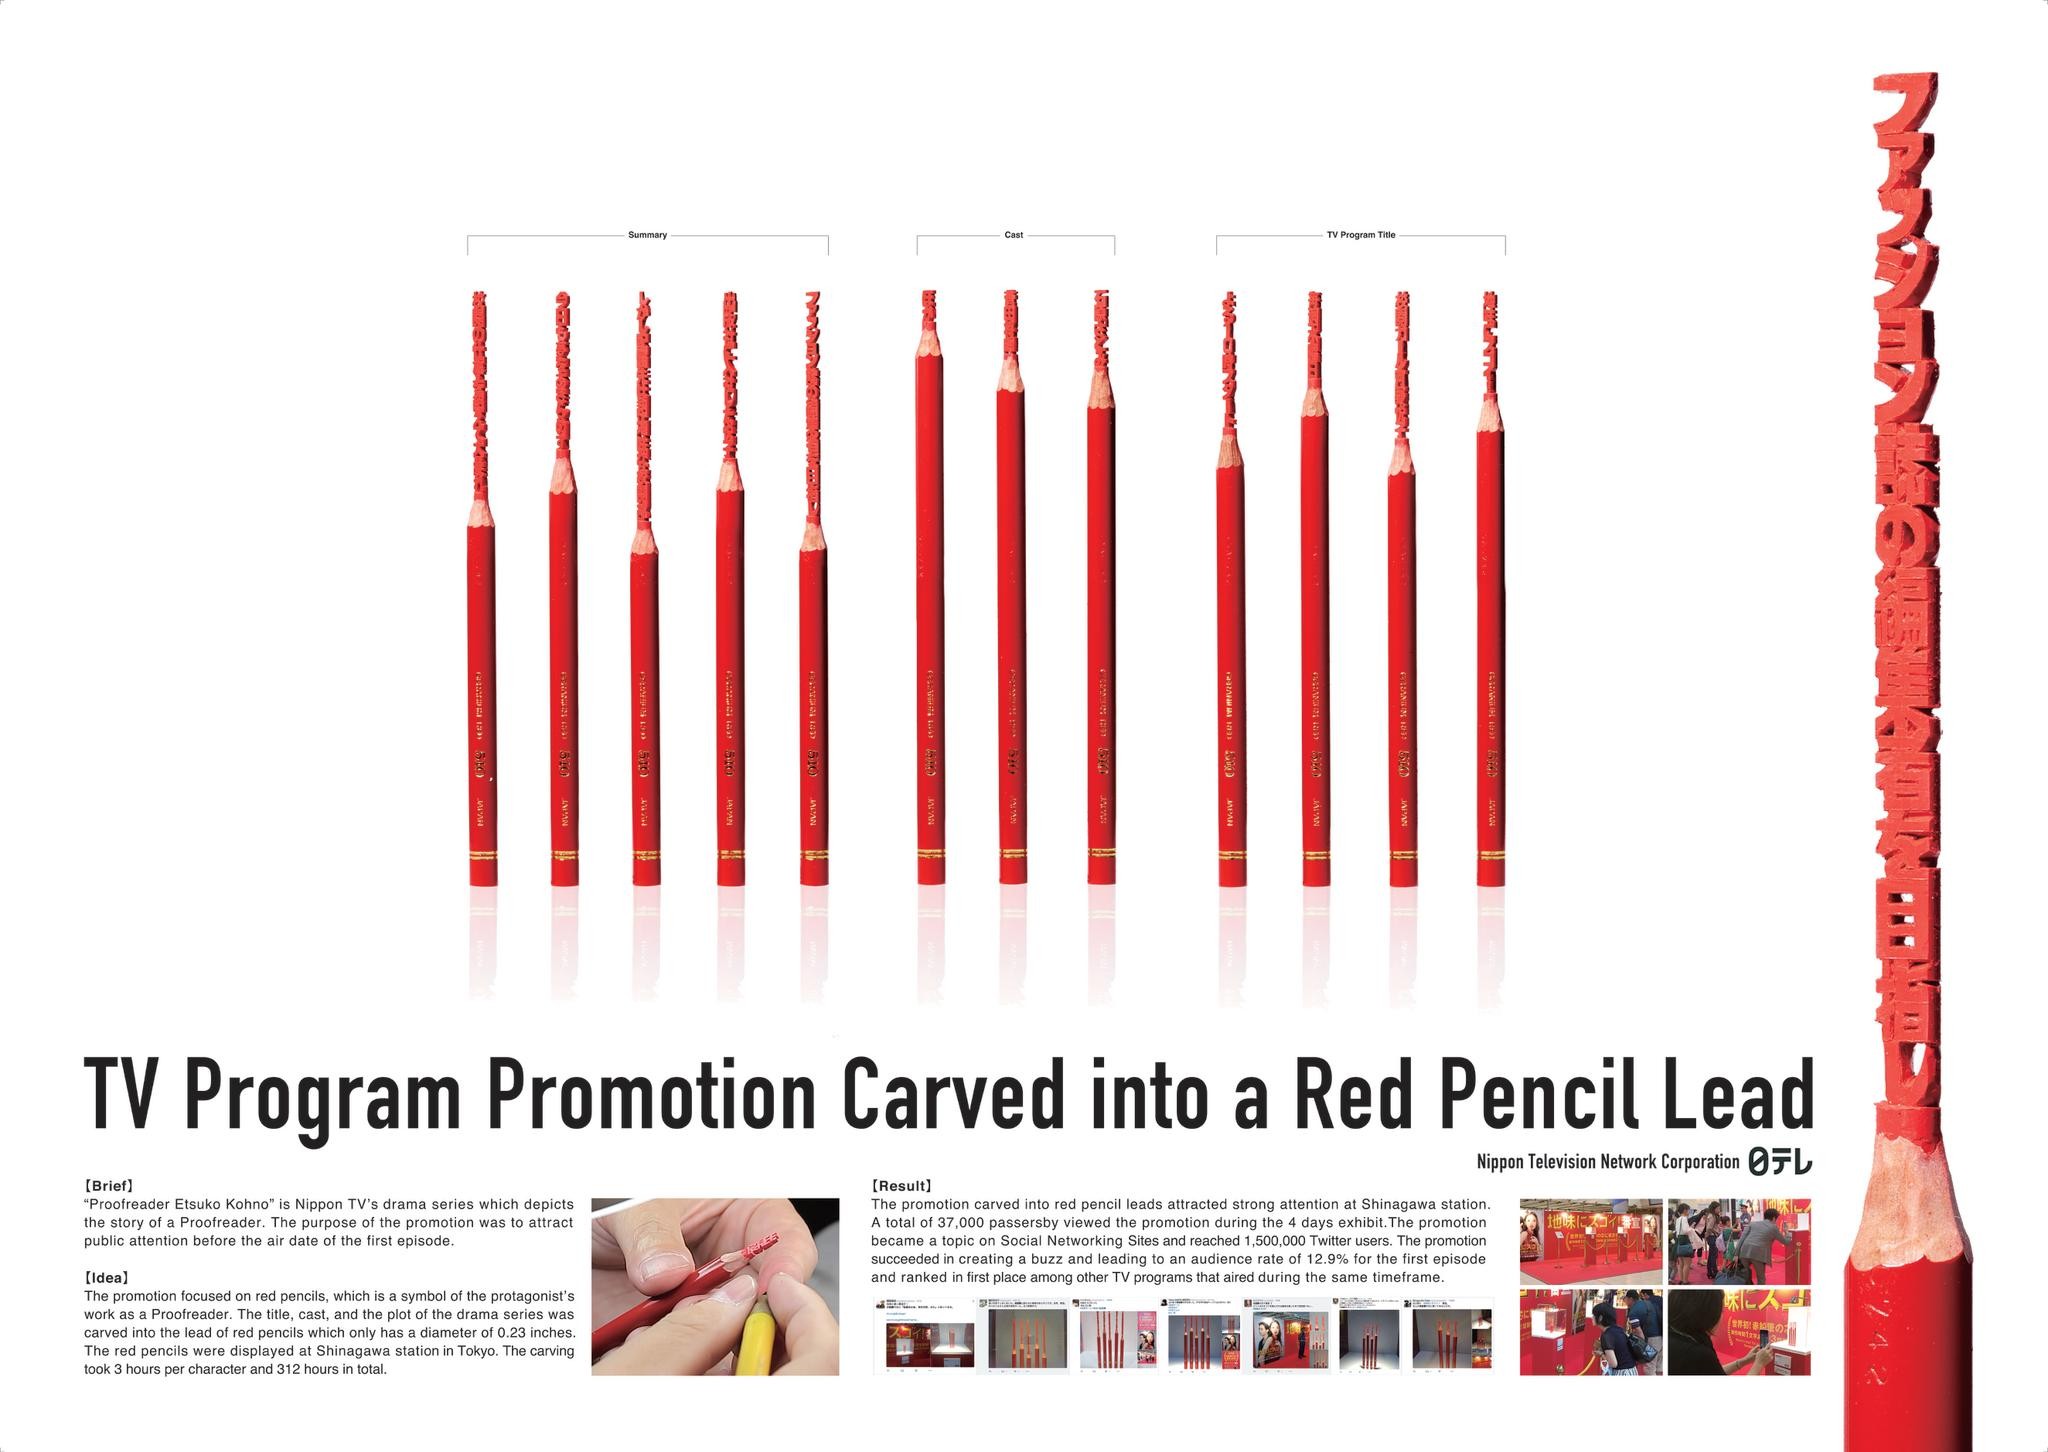 TV PROGRAM PROMOTION CARVED INTO A RED PENCIL LEAD